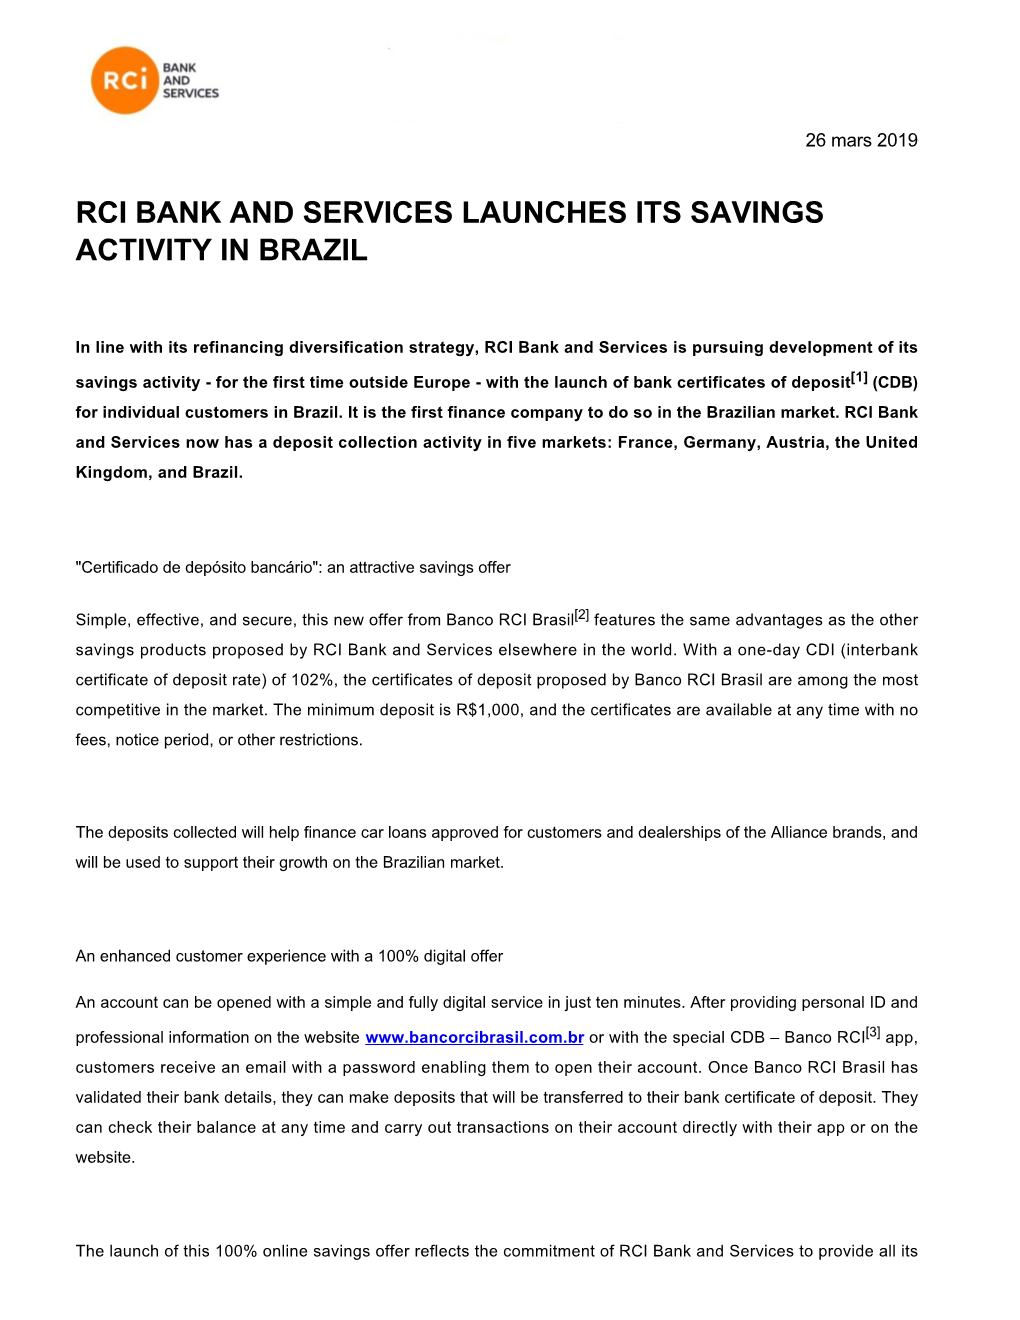 Rci Bank and Services Launches Its Savings Activity in Brazil